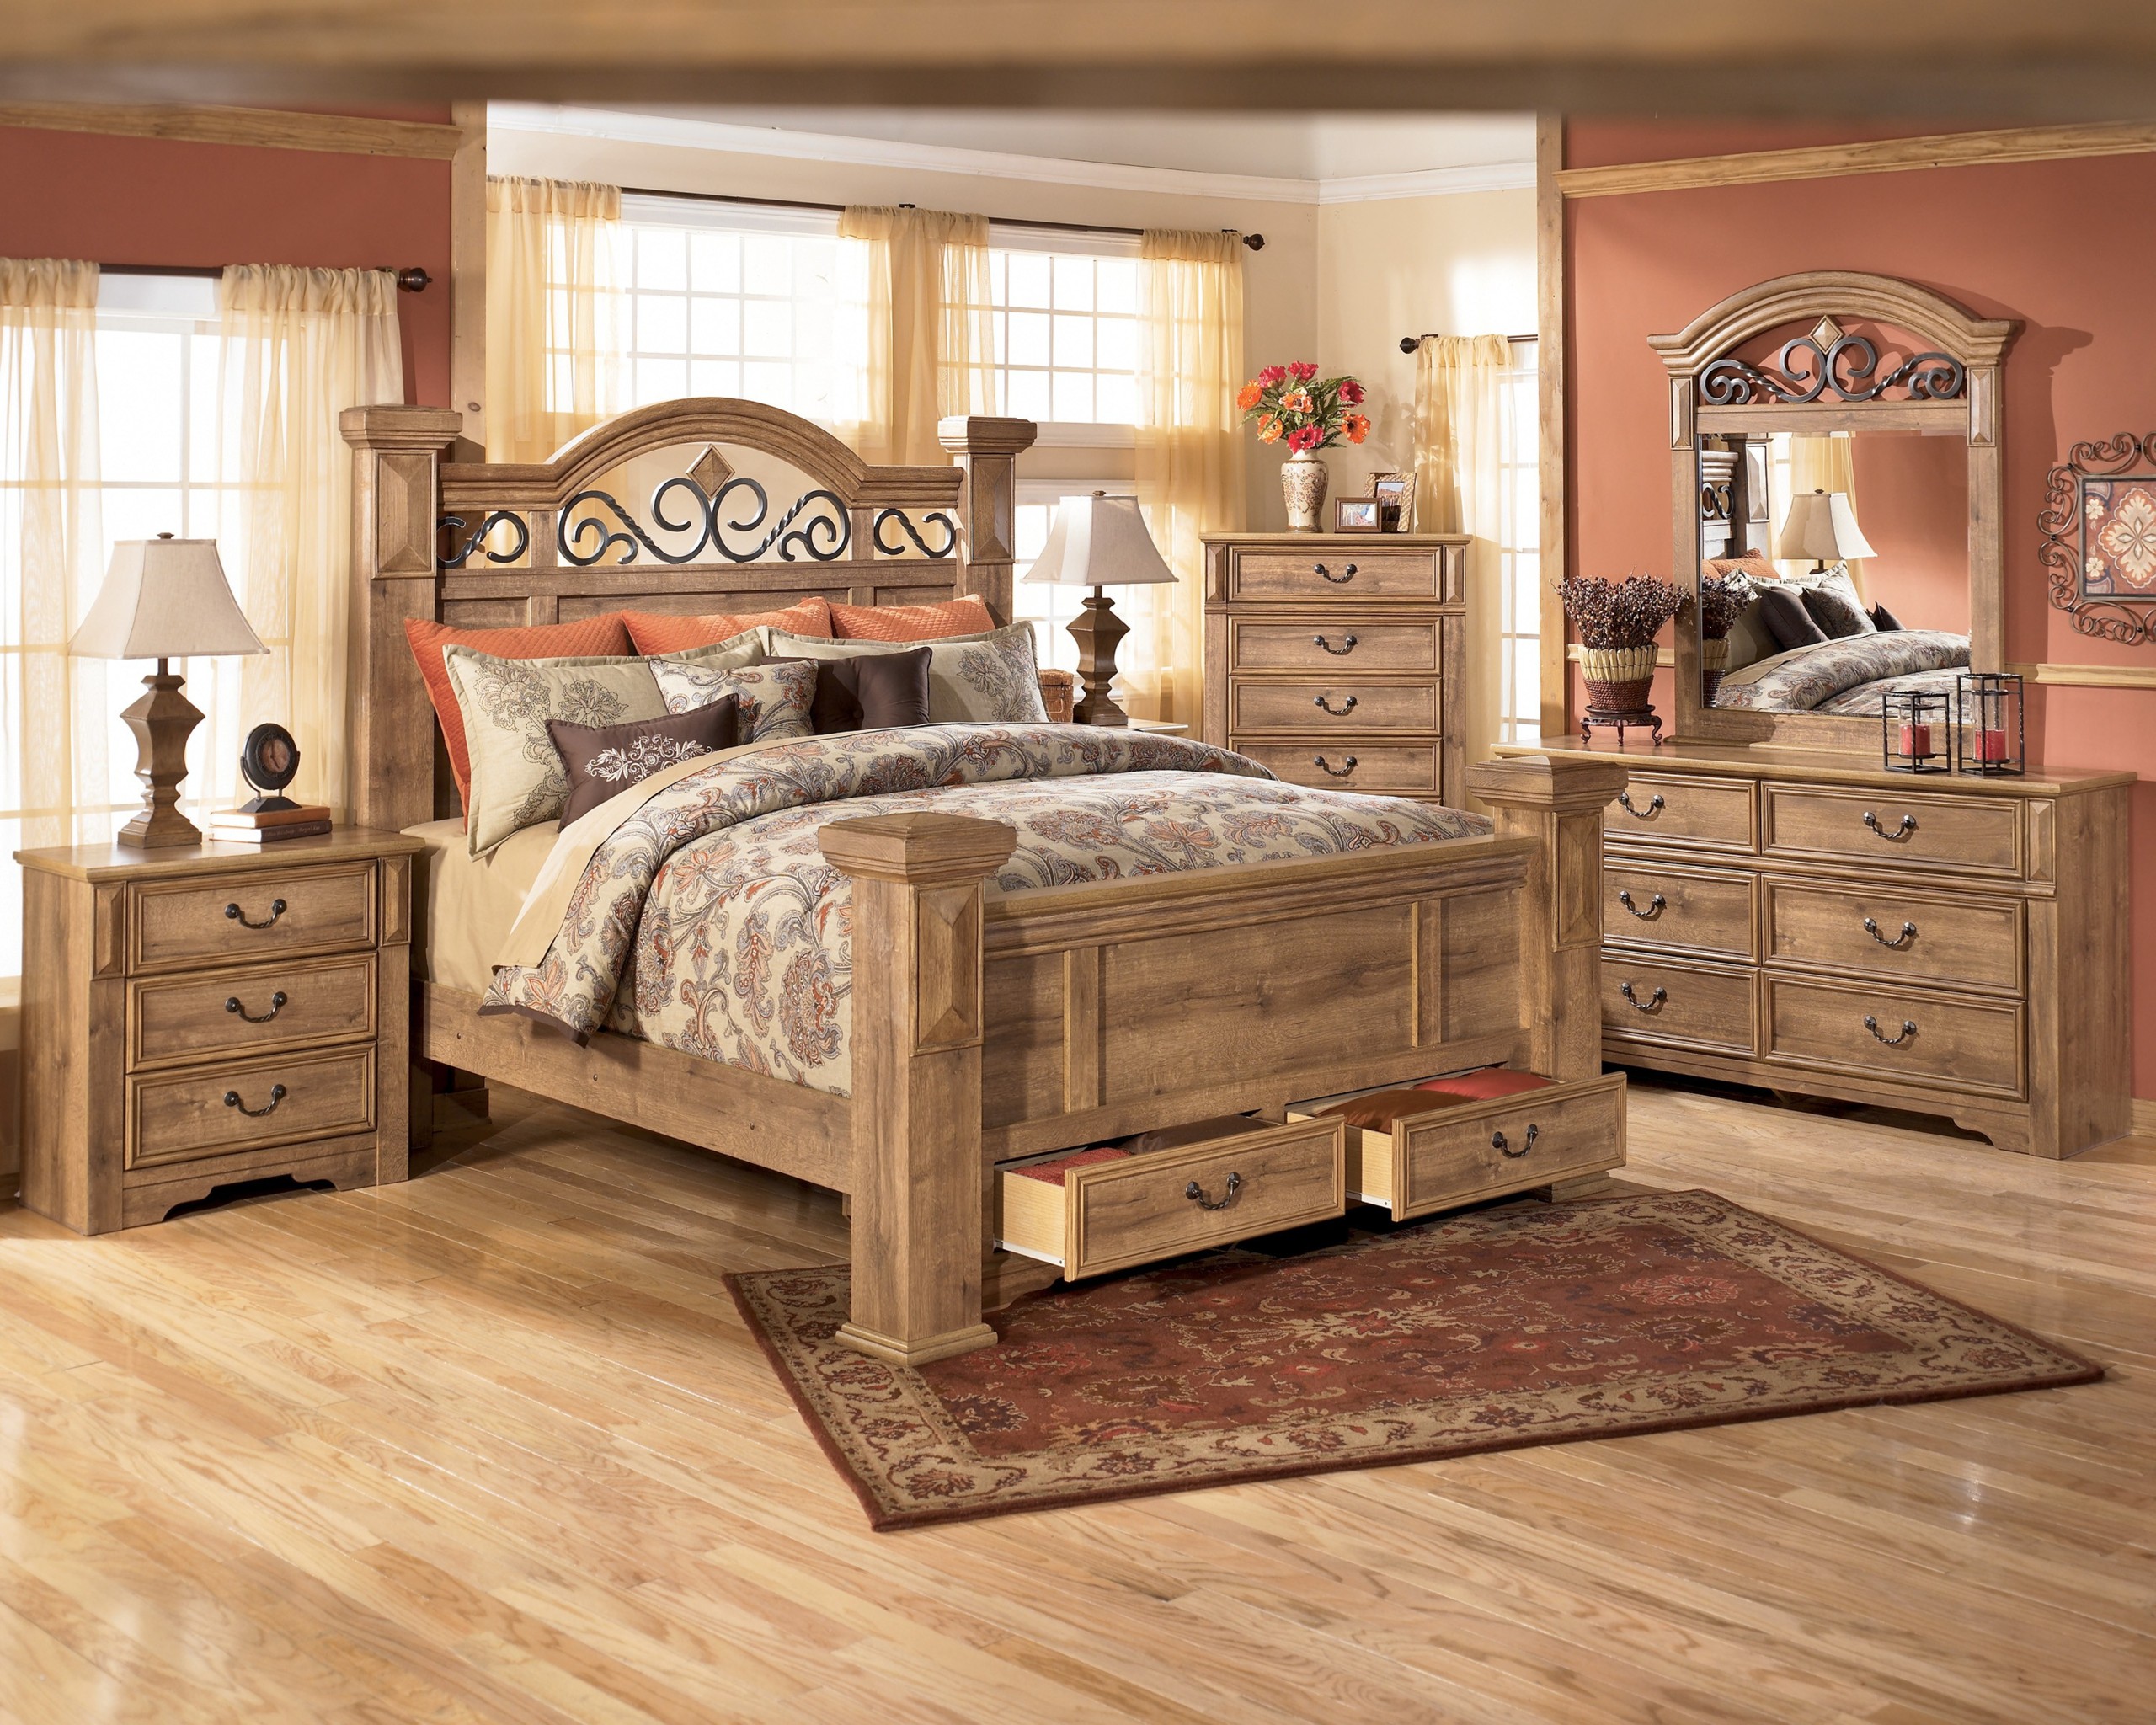 Wood and wrought iron bedroom sets 2